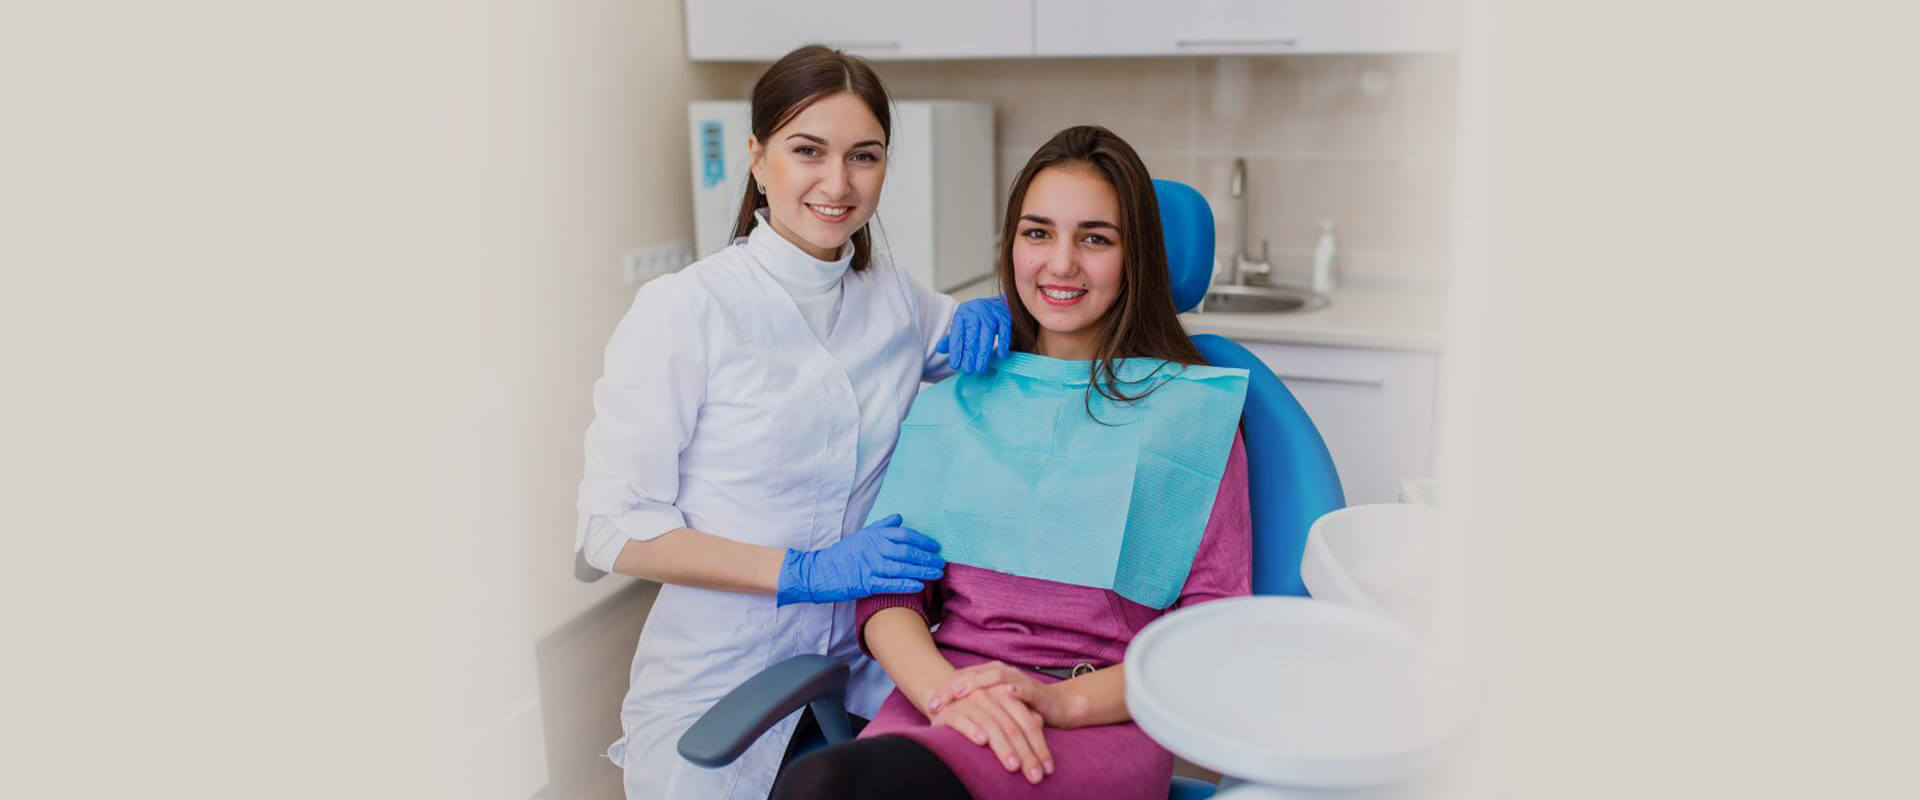 Looking for a dentist in North Oshawa?